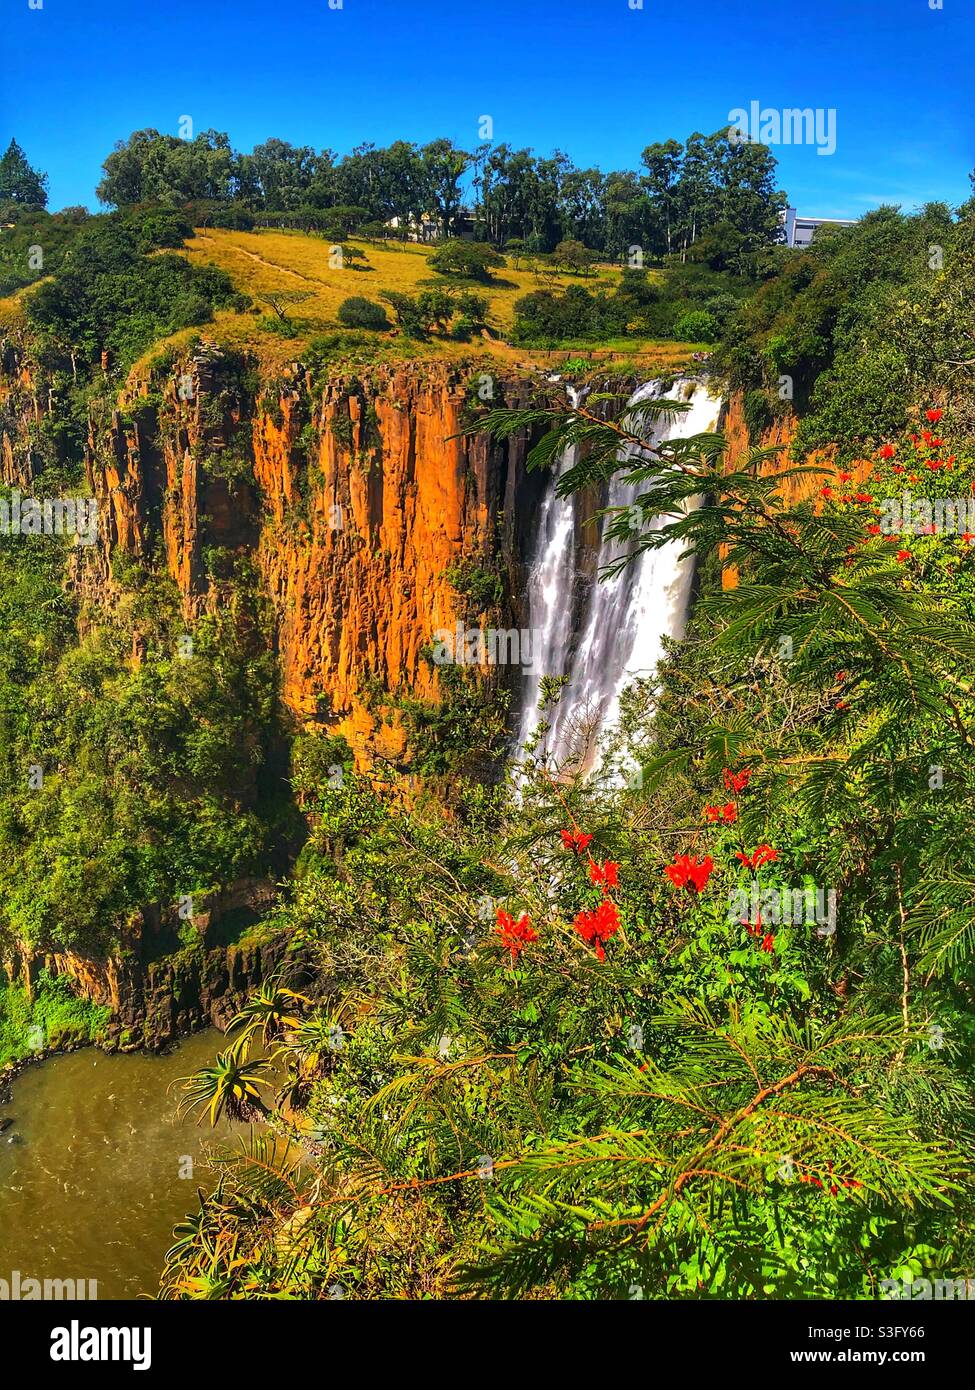 Cascading Howick Falls with a bush of red honeysuckle in the foreground Stock Photo